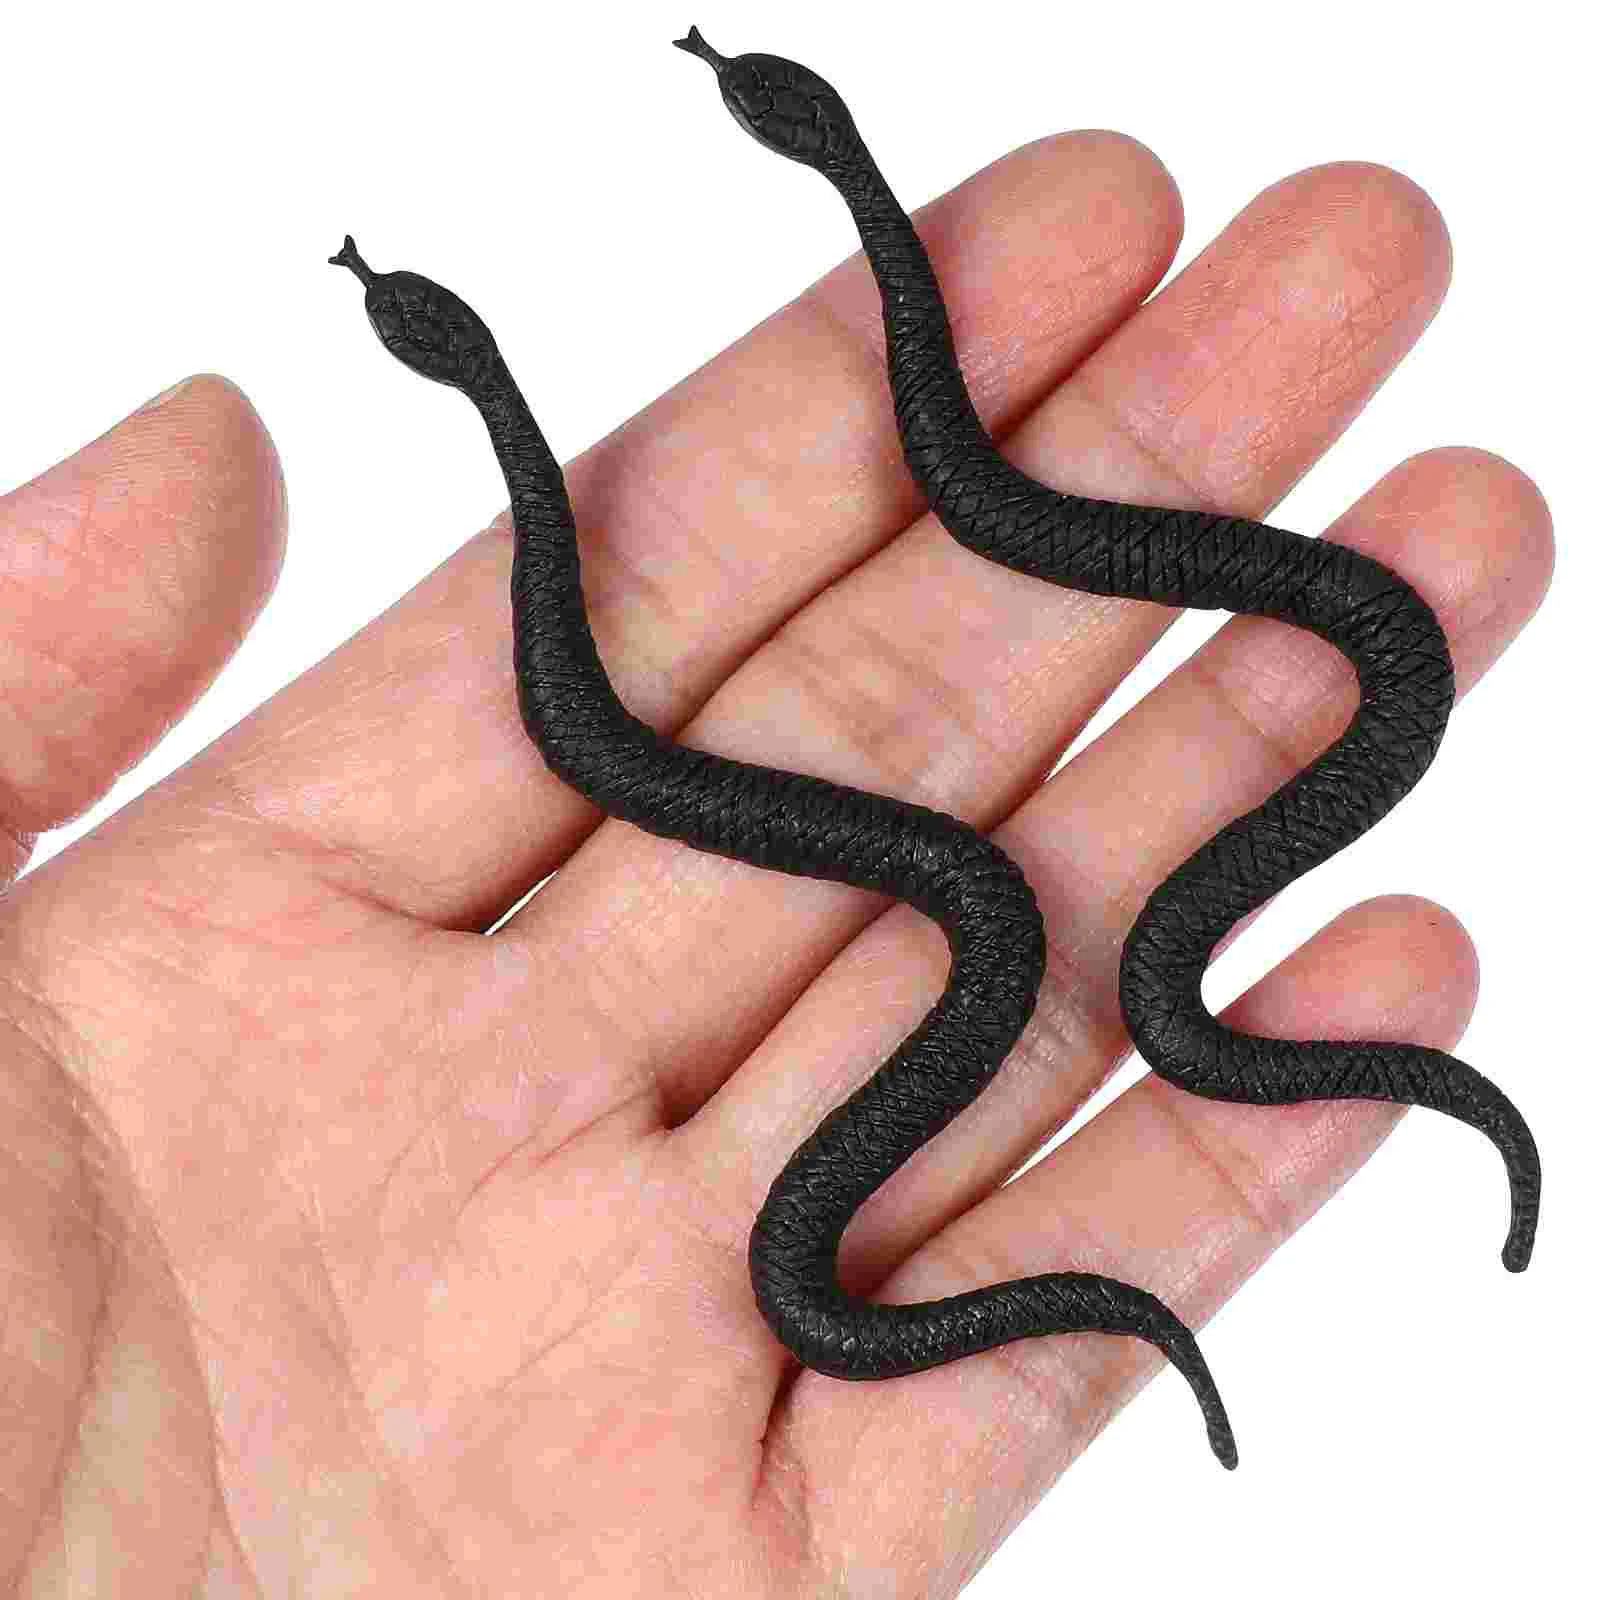 100 Pcs Simulation Snake Model Childrens Toys Faux Snakes Props Fake for Party Plastic Trick Realistic simulation mango faux fruit props photo props hotel shop home house kitchen cabinet decoracion artificial fake fruit model toys